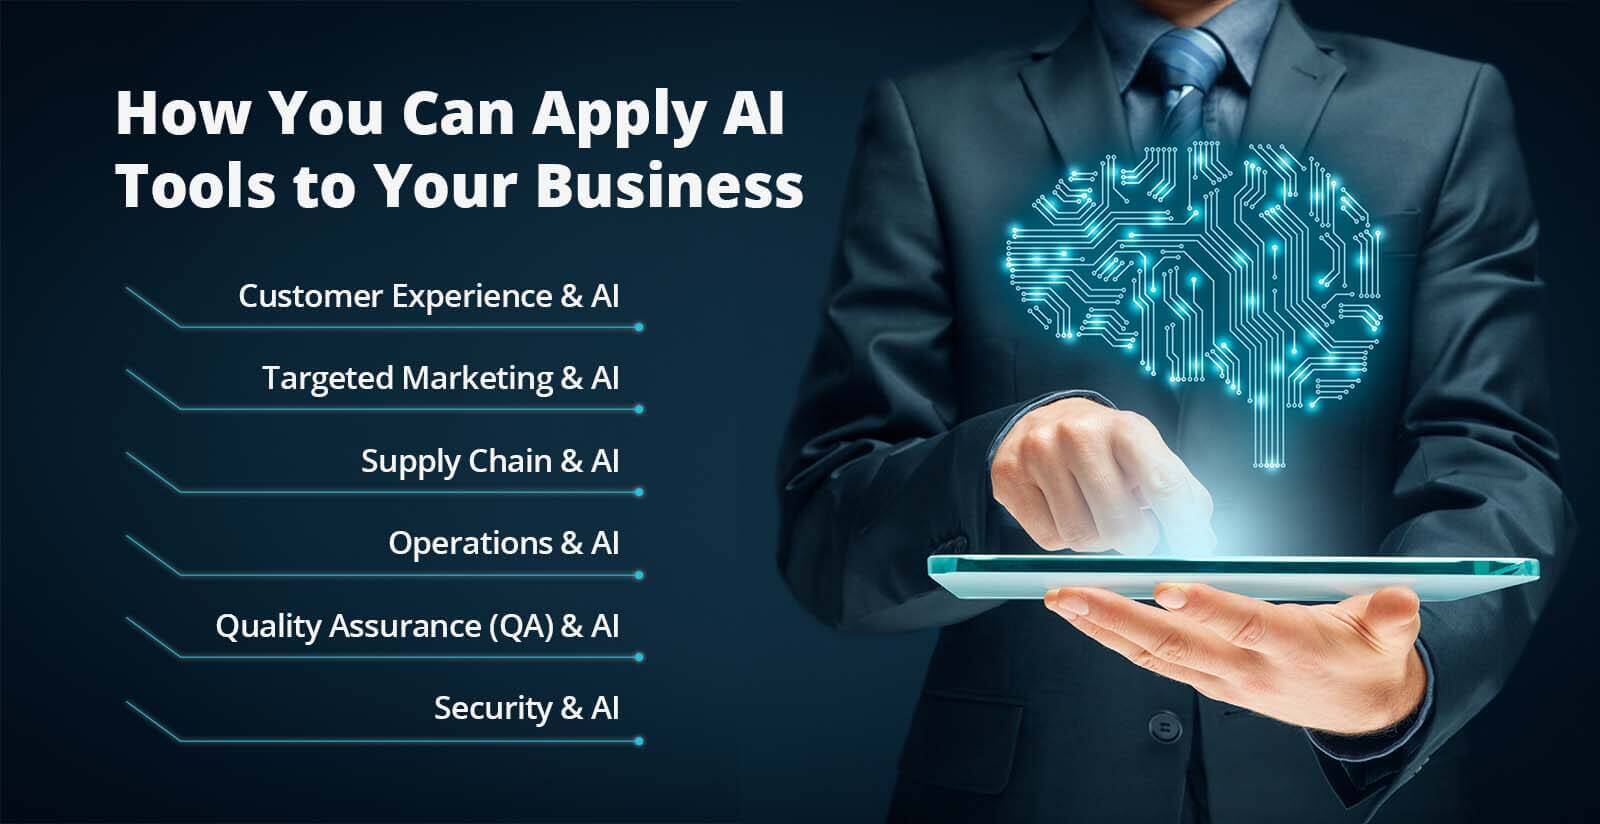 how you can apply AI tools to your business